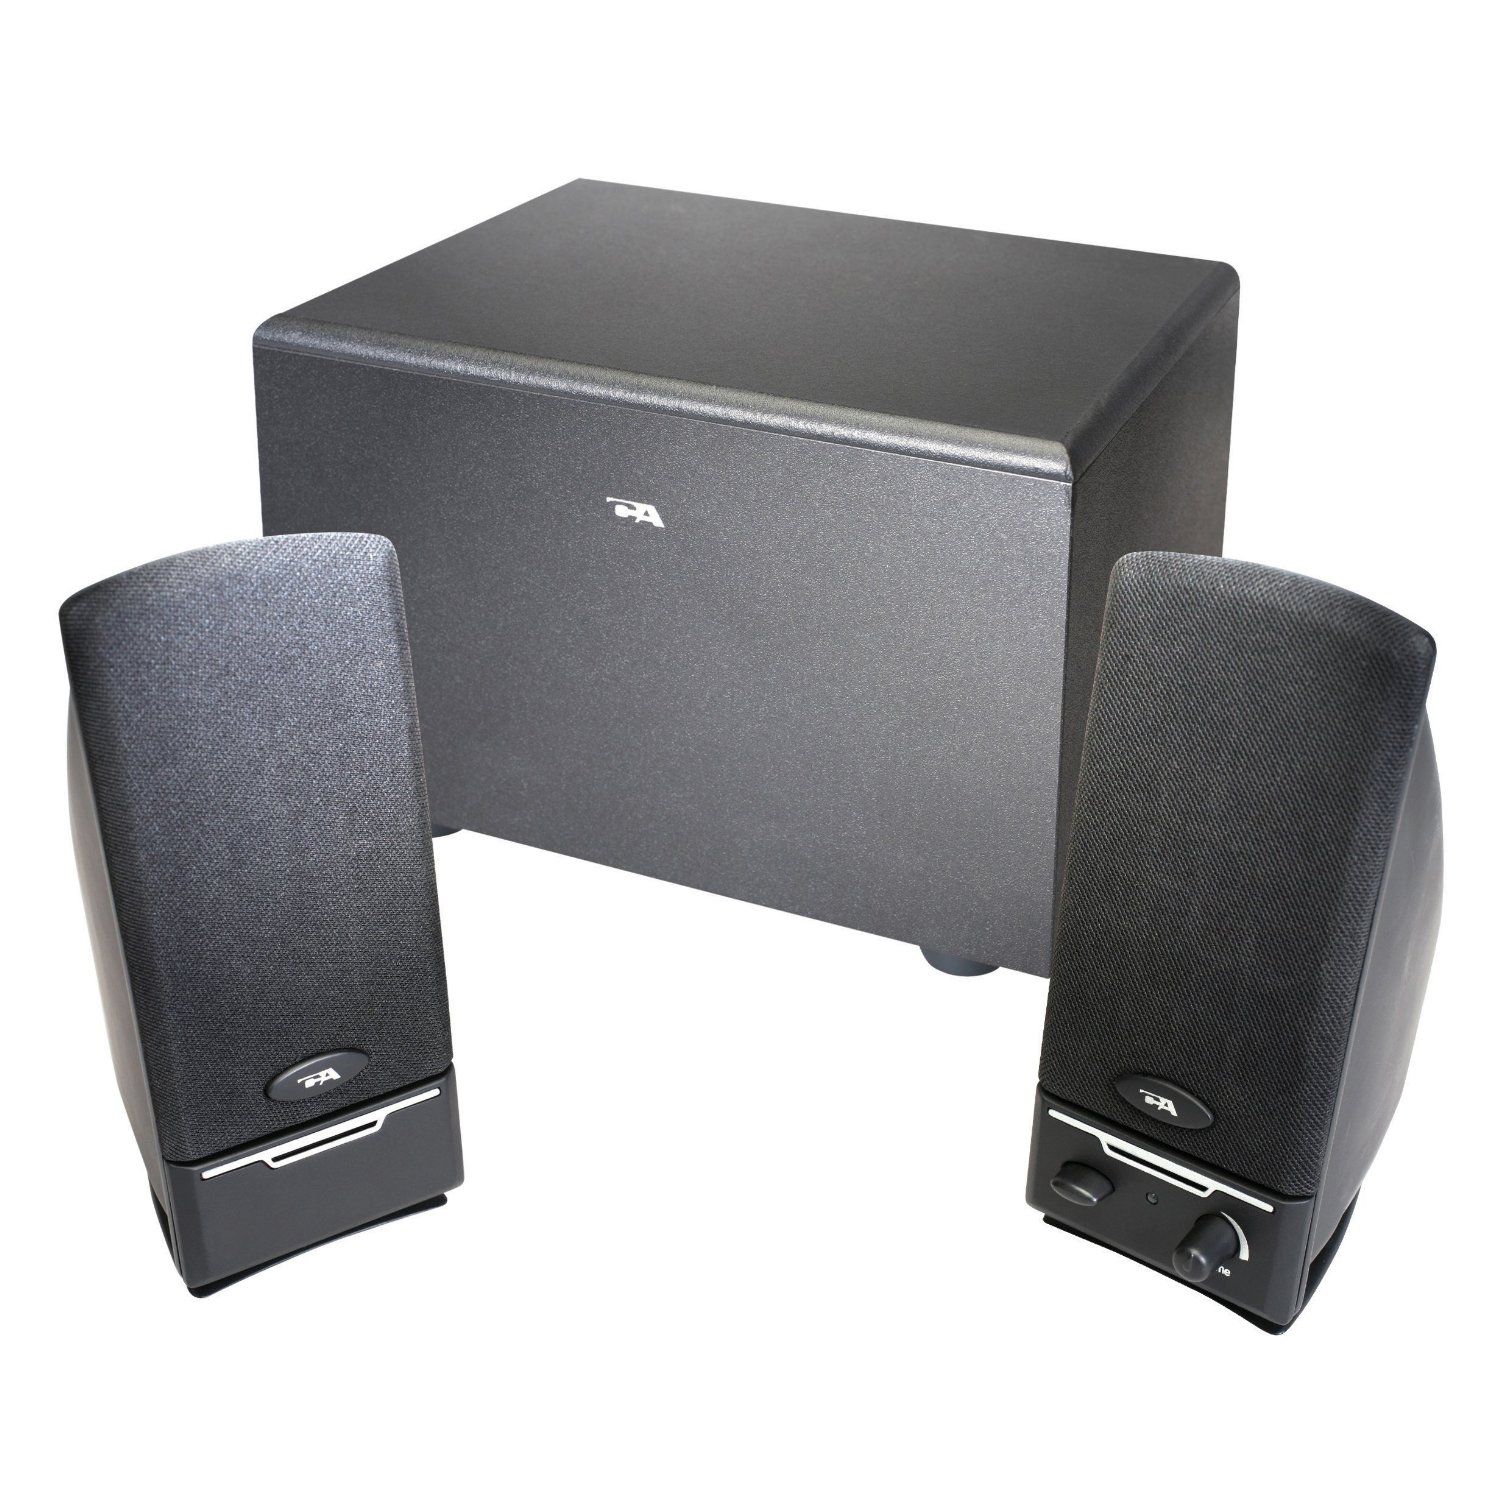 Cyber Acoustics CA-3000-1 2.1 Powered Computer Speaker System with Subwoofer